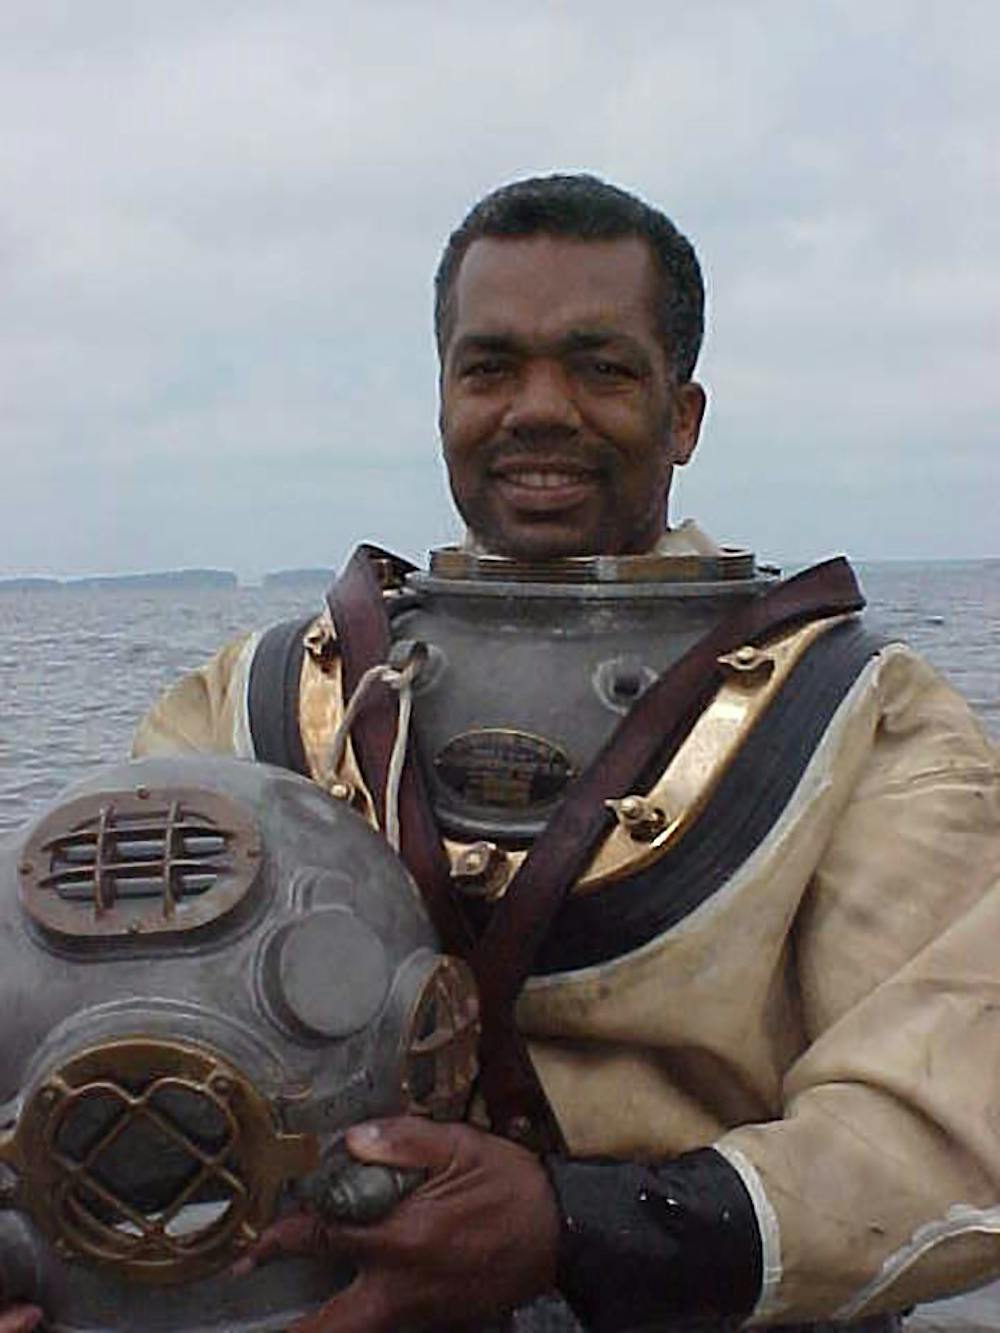 Anthony Walker poses in his dive gear. Walker worked for the South Carolina Department of National Resources’ dive team from 1997 to 2007.